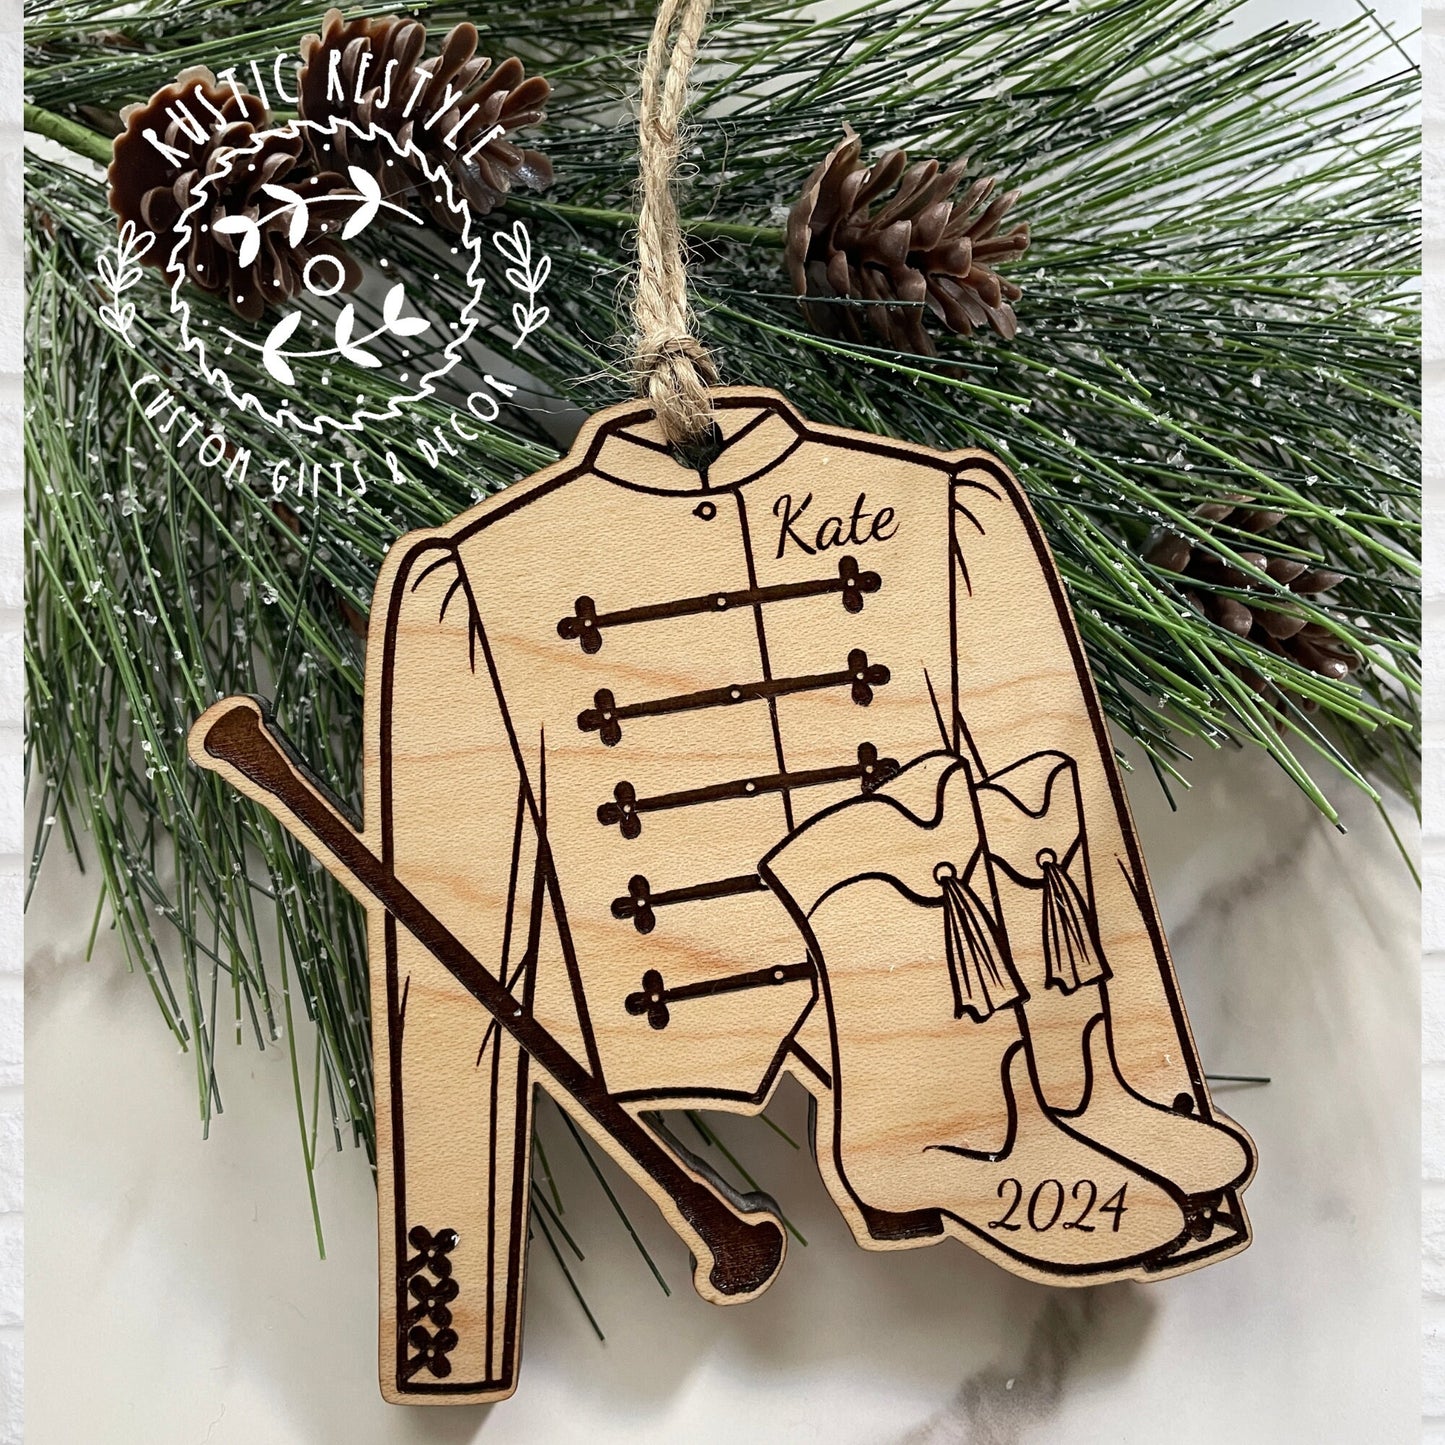 Majorette marching band Laser Engraved Maple Ornament, baton twirl marching Ornament